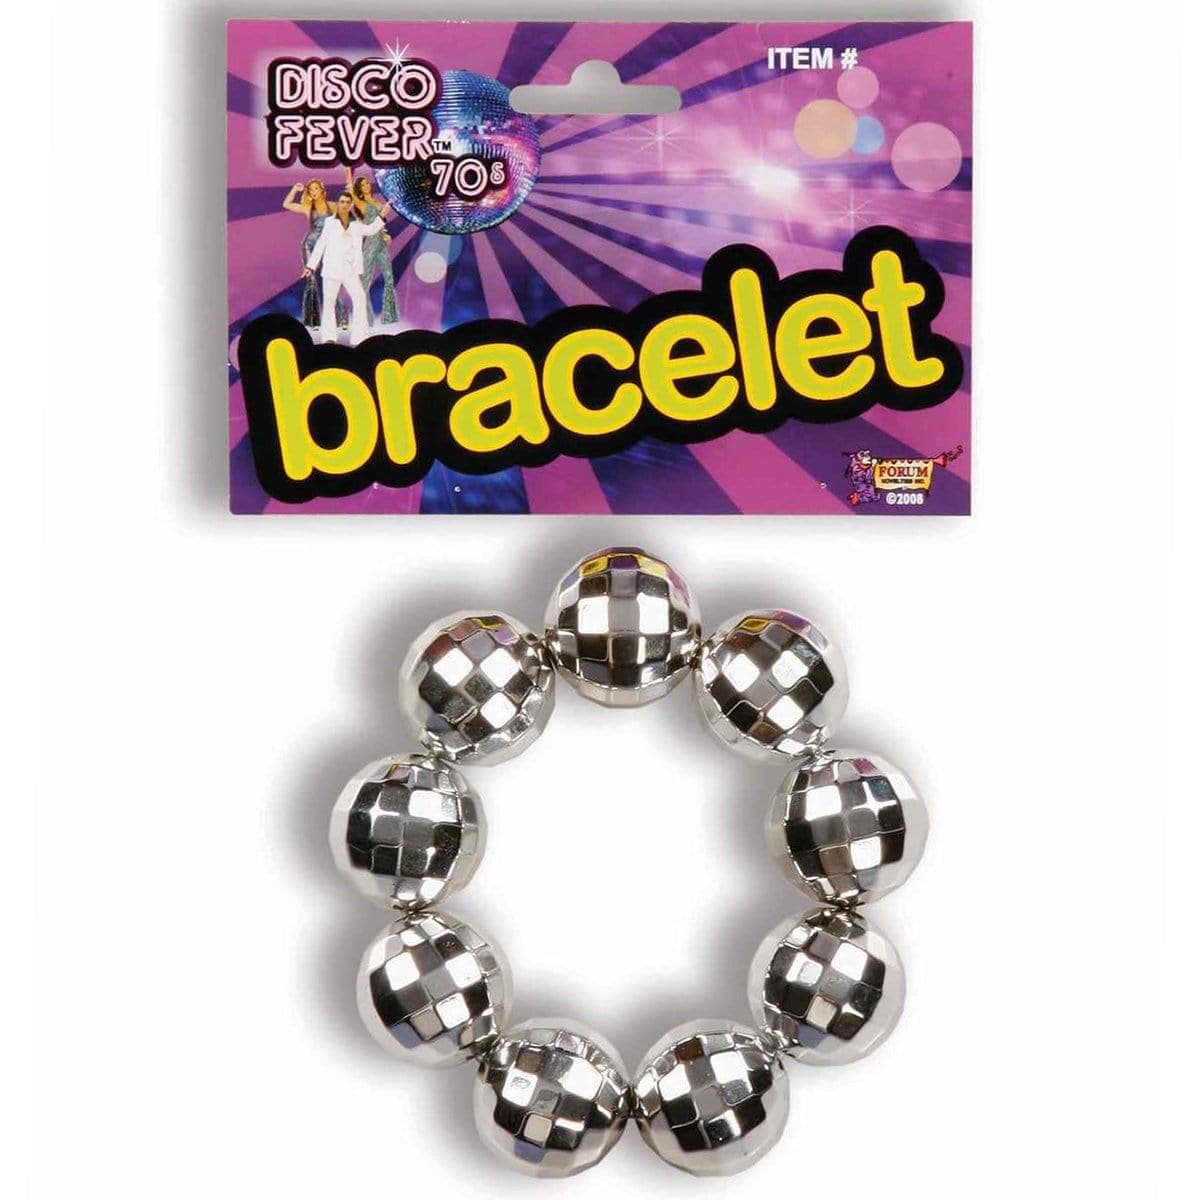 Buy Costume Accessories Disco ball bracelet sold at Party Expert